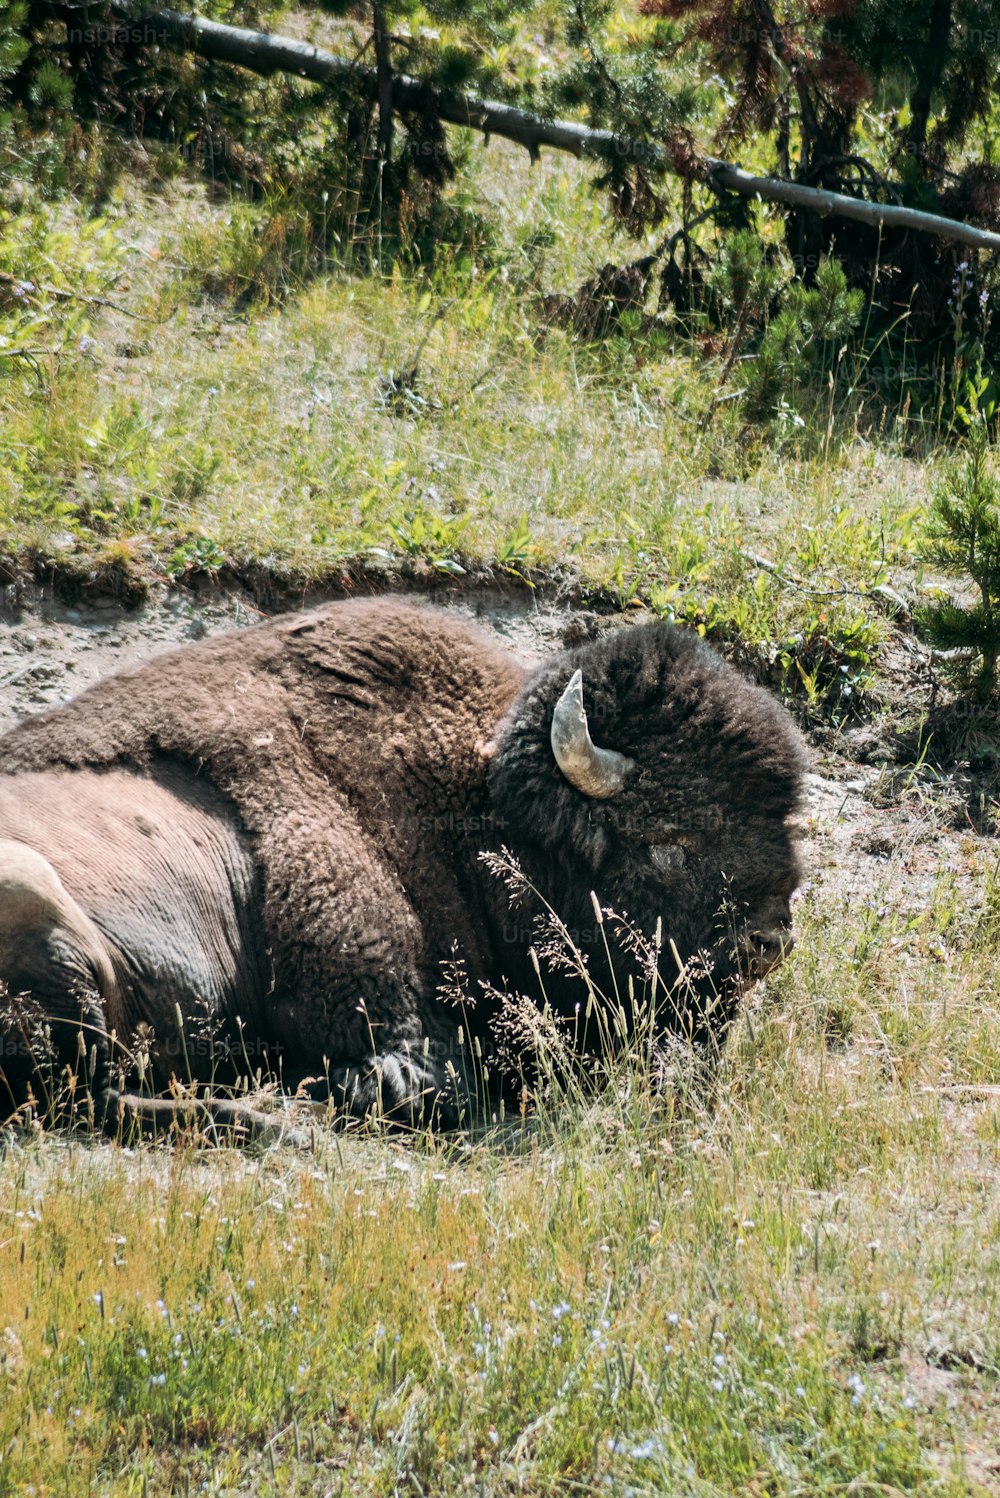 a bison laying down in a field of grass